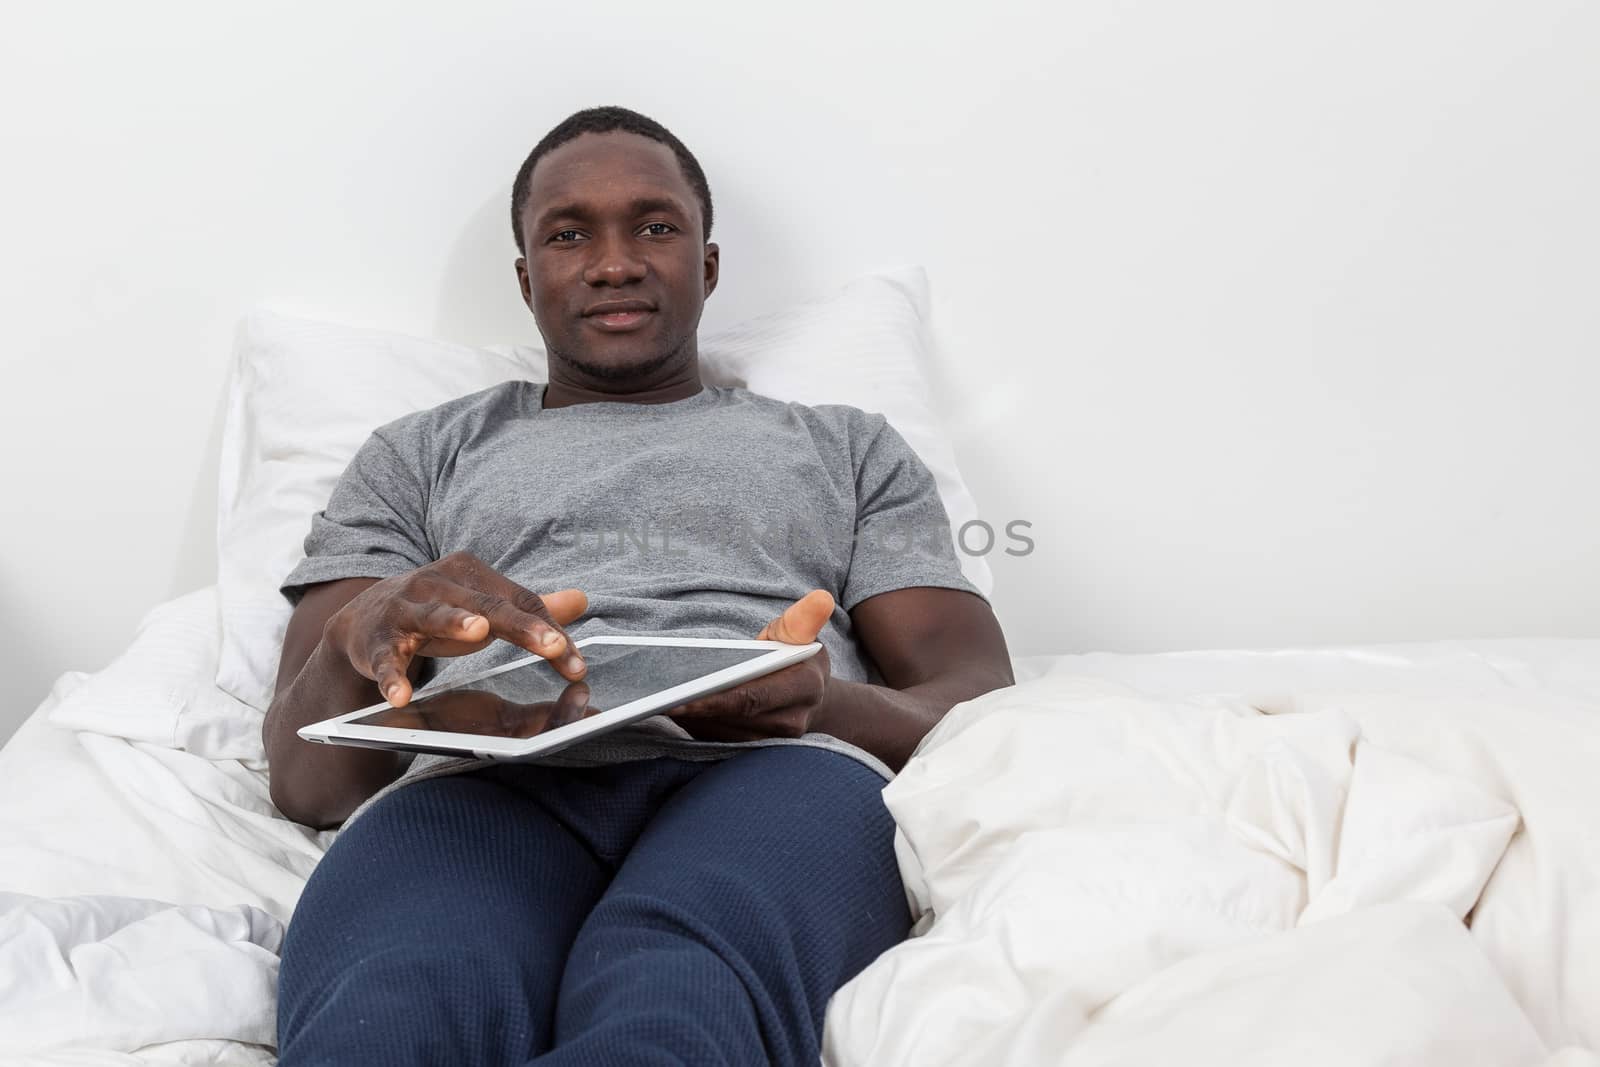 Man looking at camera and touching his tablet